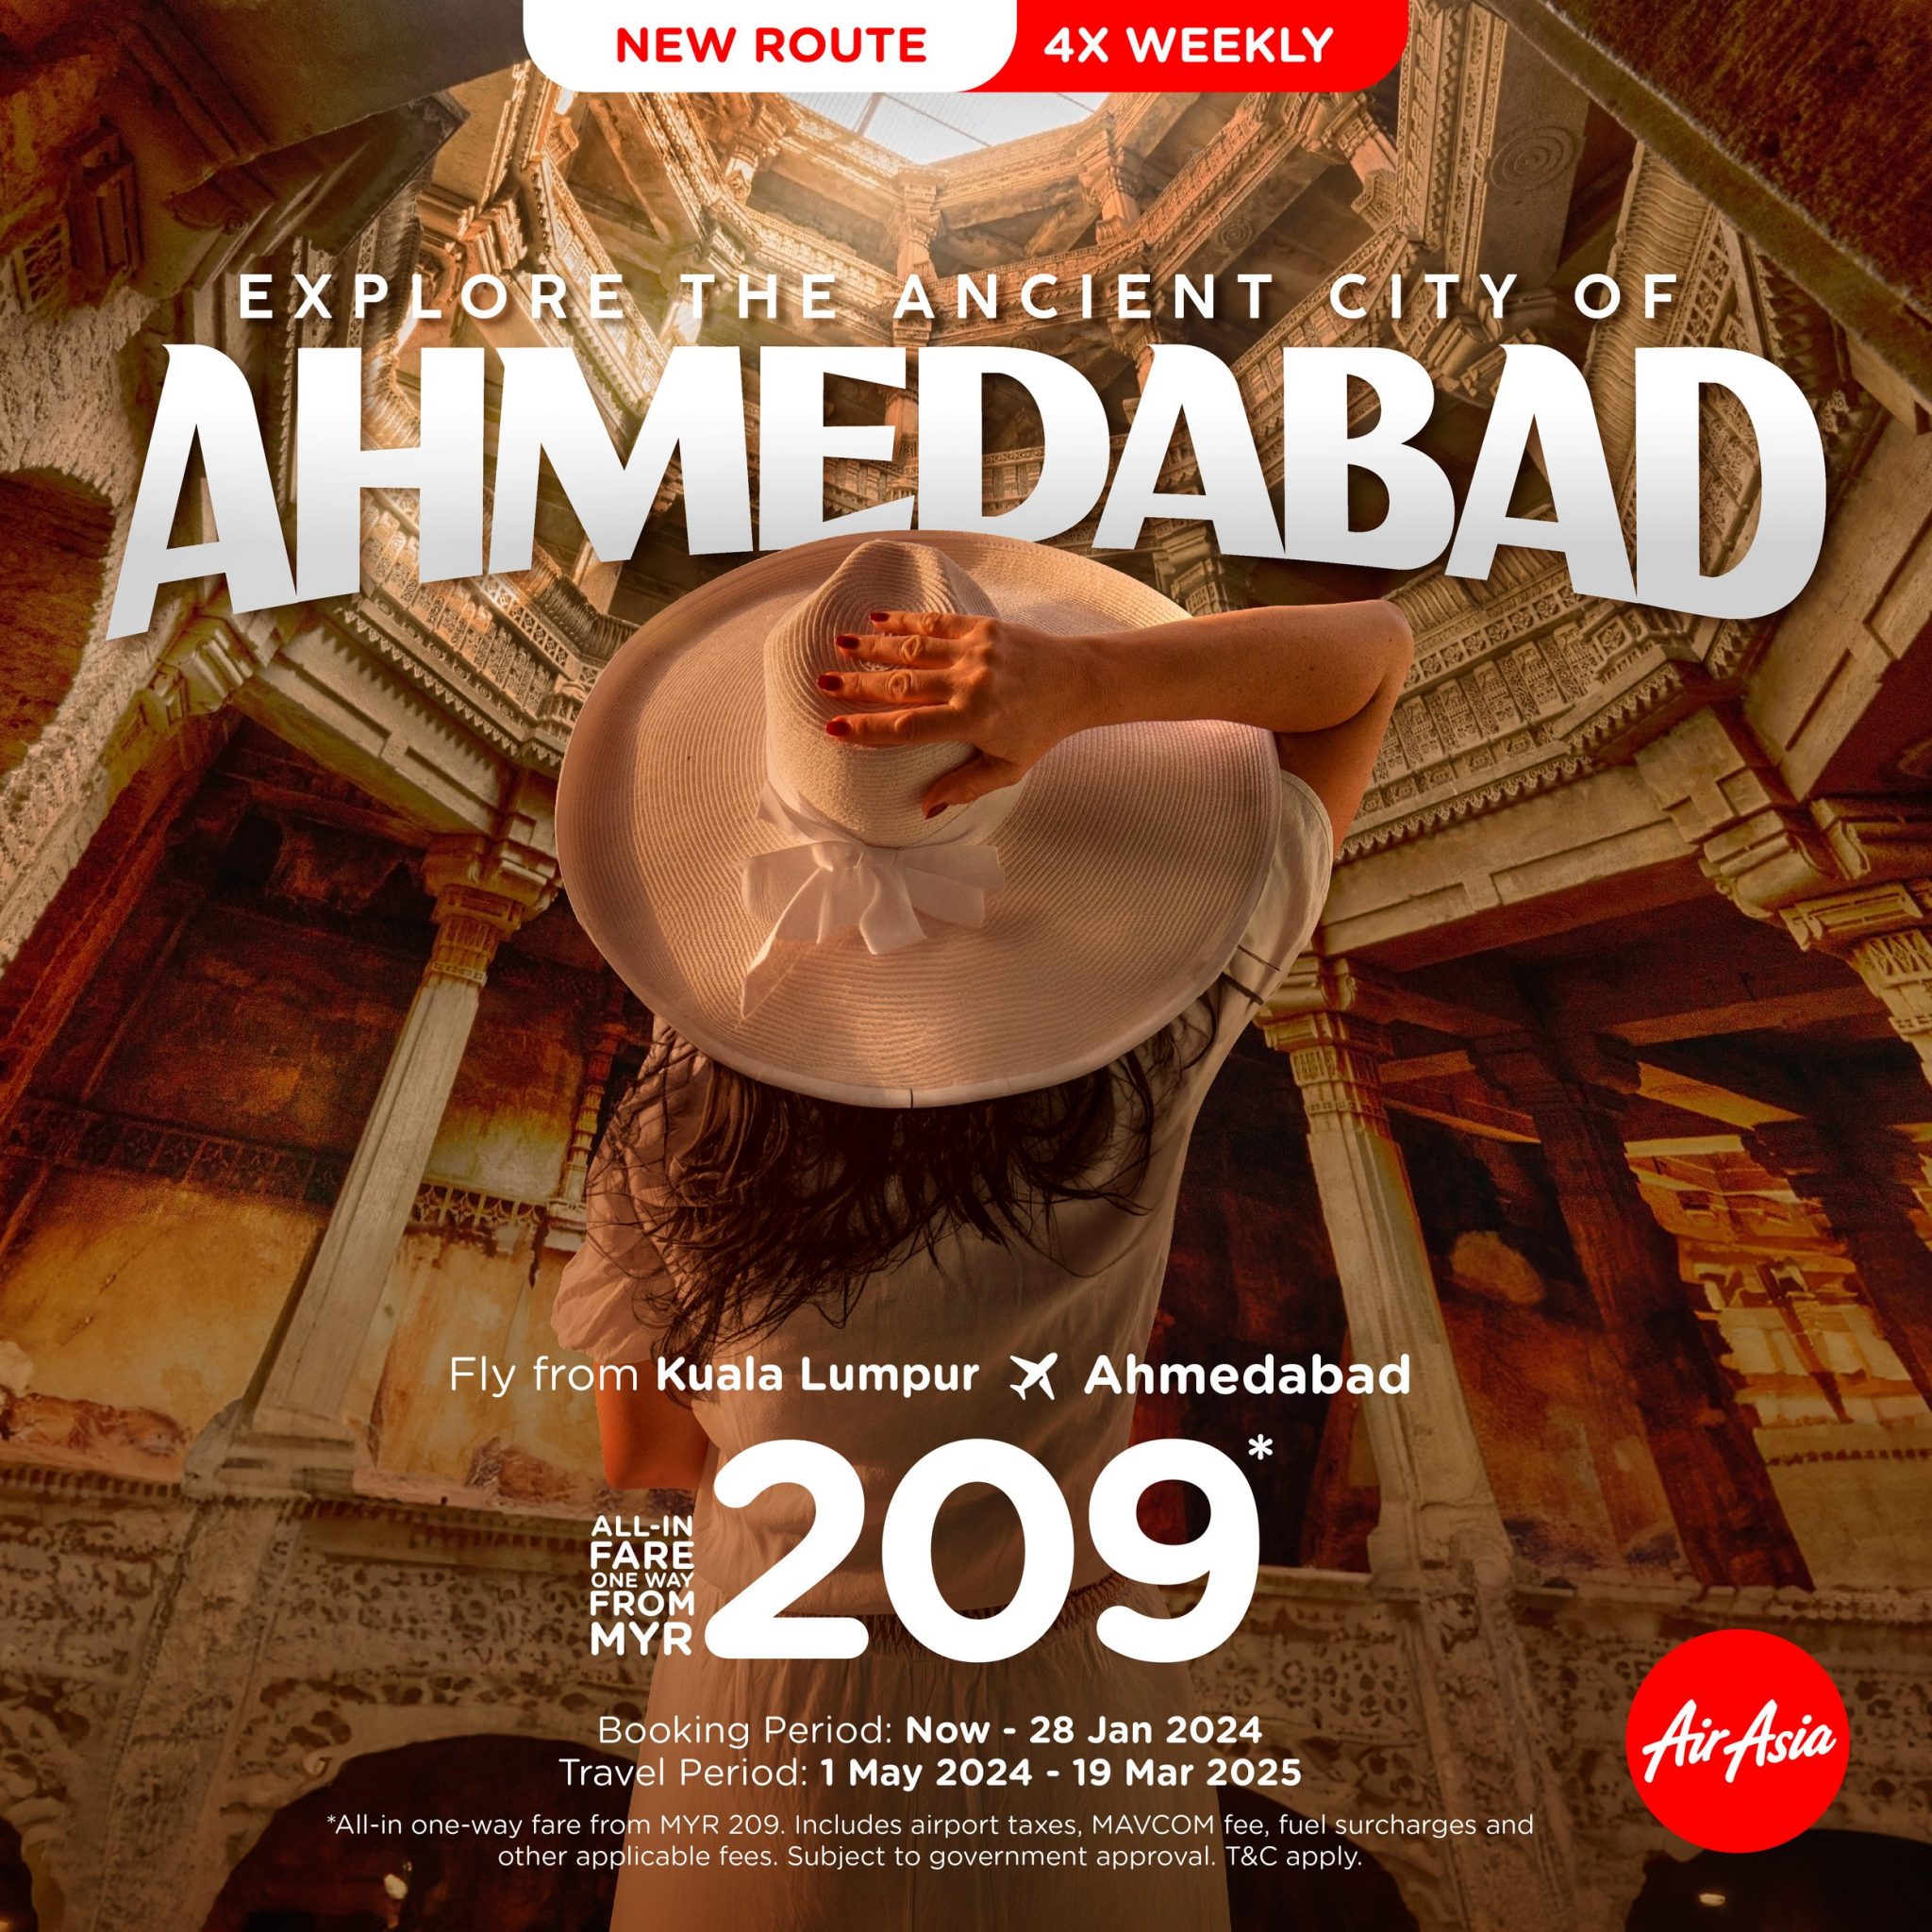 New gateway to India: AirAsia flies direct to Ahmedabad